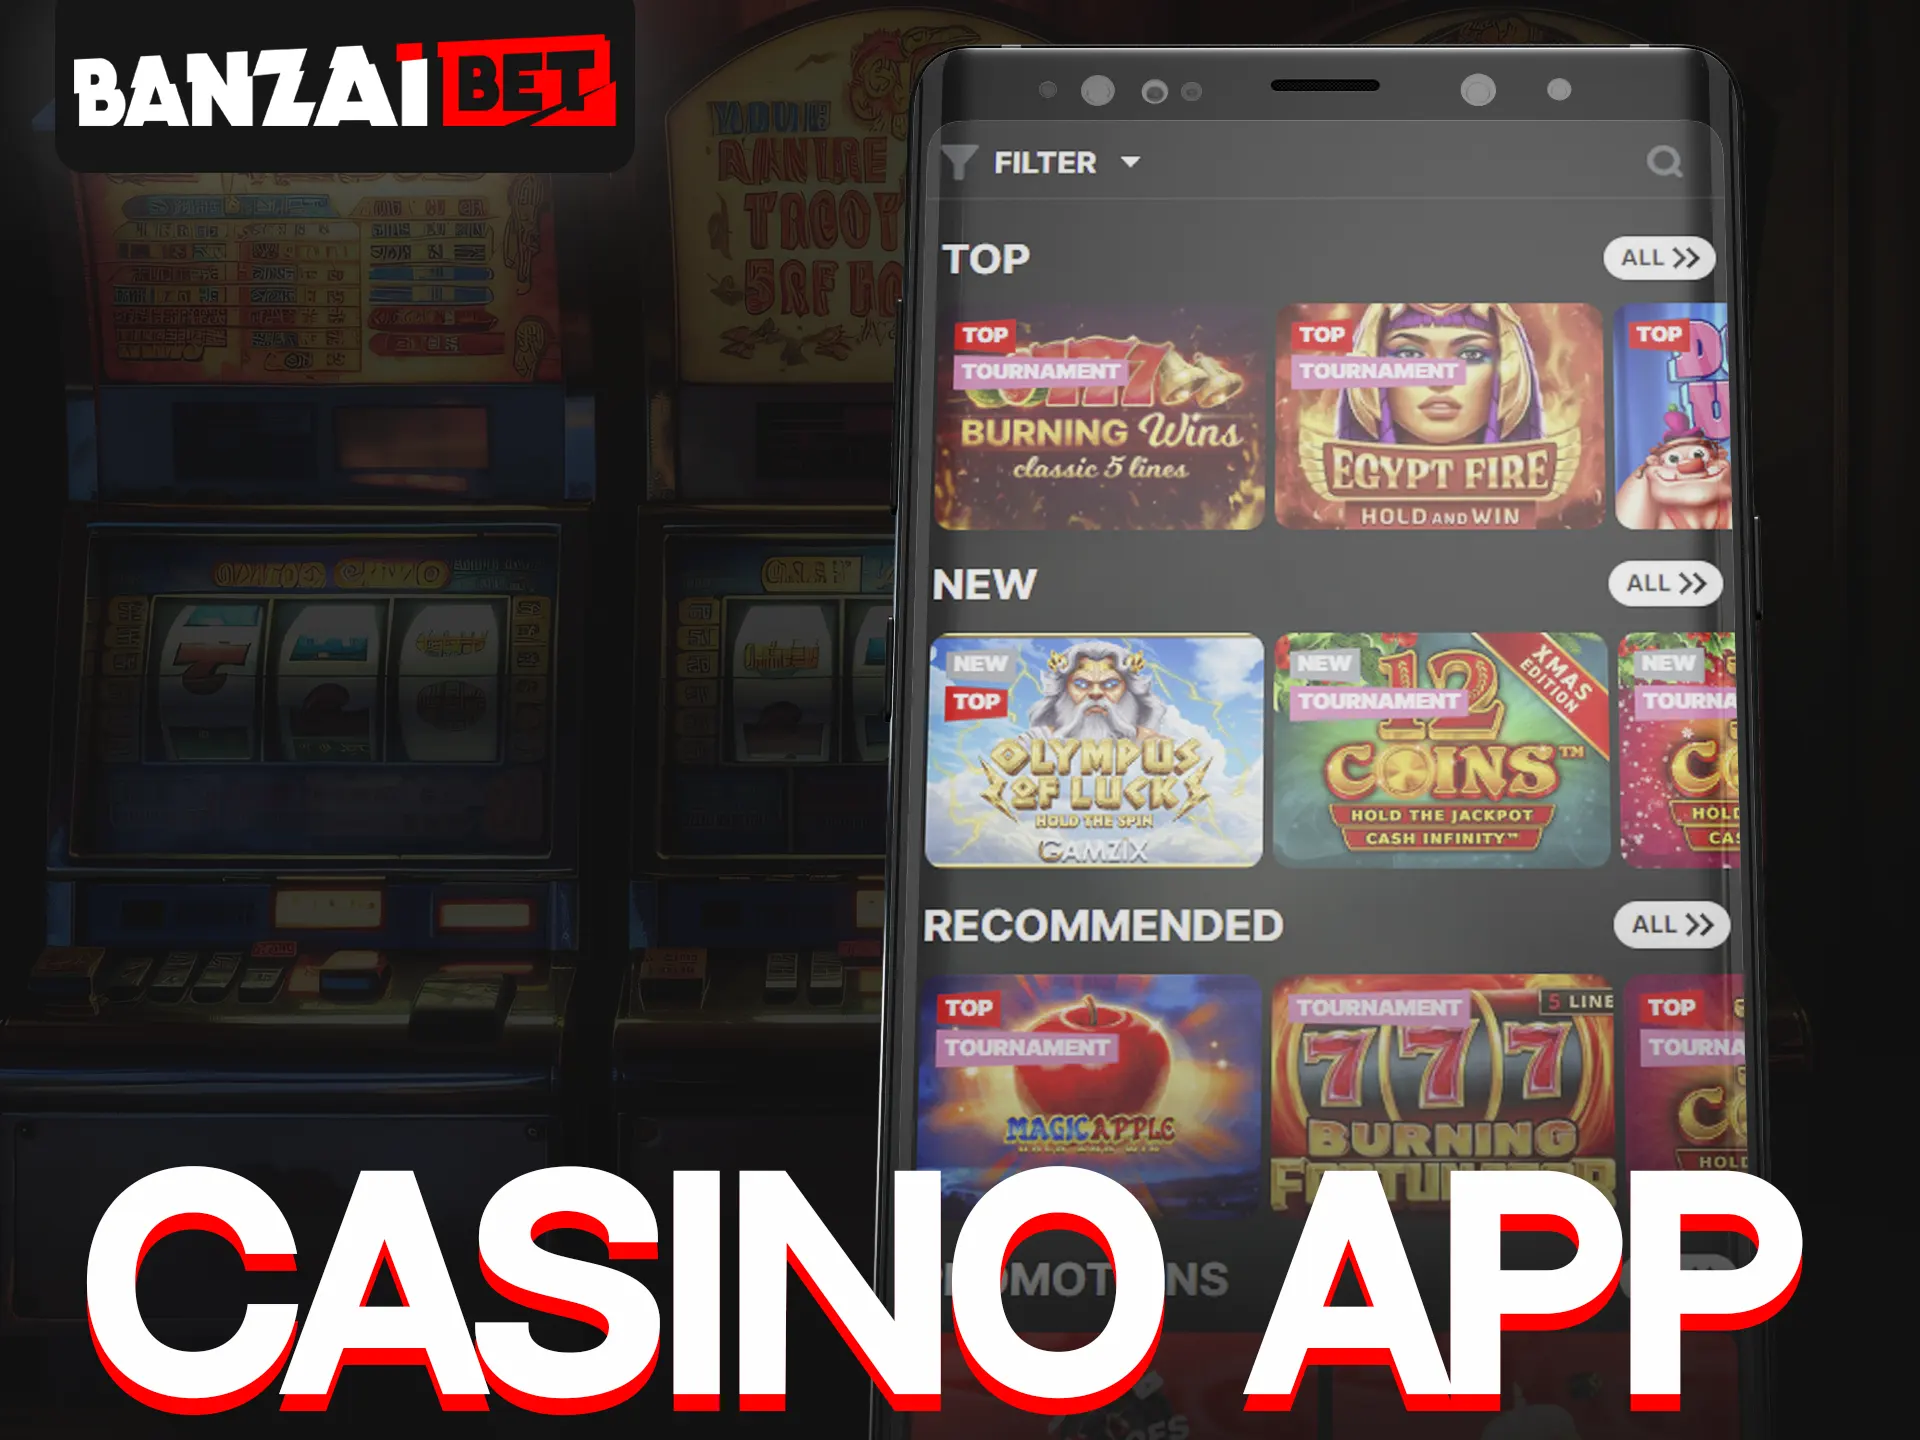 Check out the most popular Banzai Bet casino games.